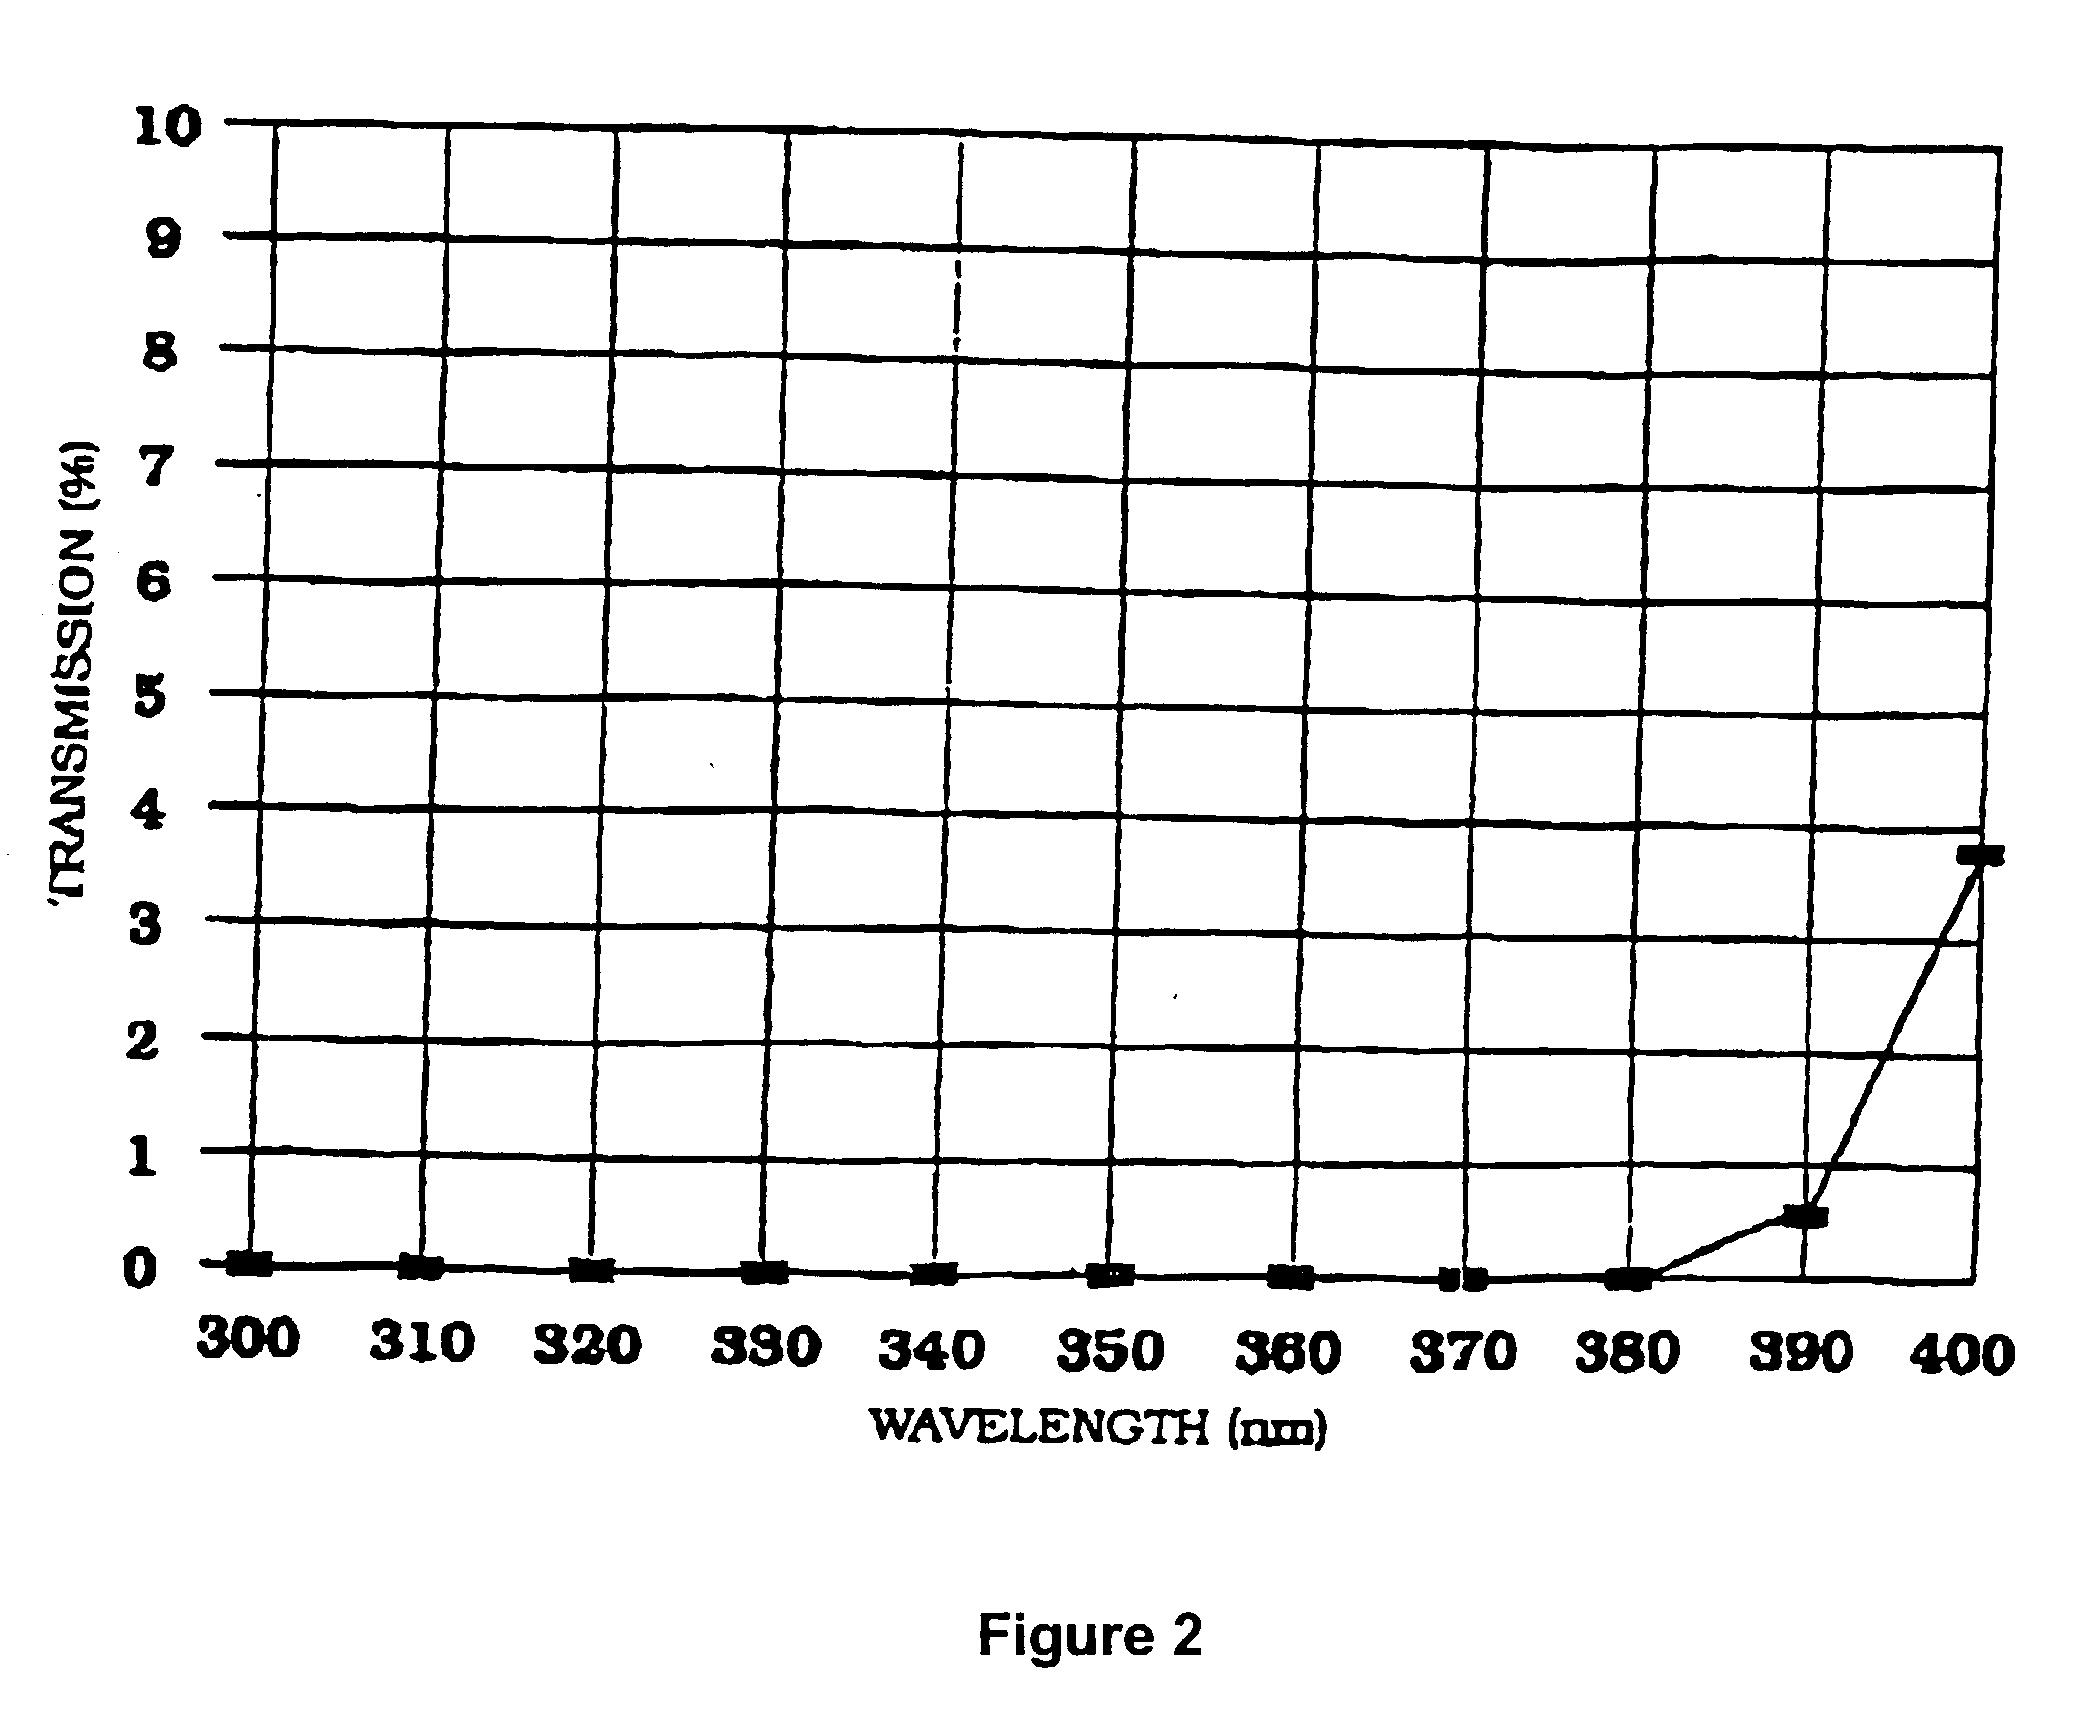 System and methods for filtering electromagnetic visual, and minimizing acoustic transmissions